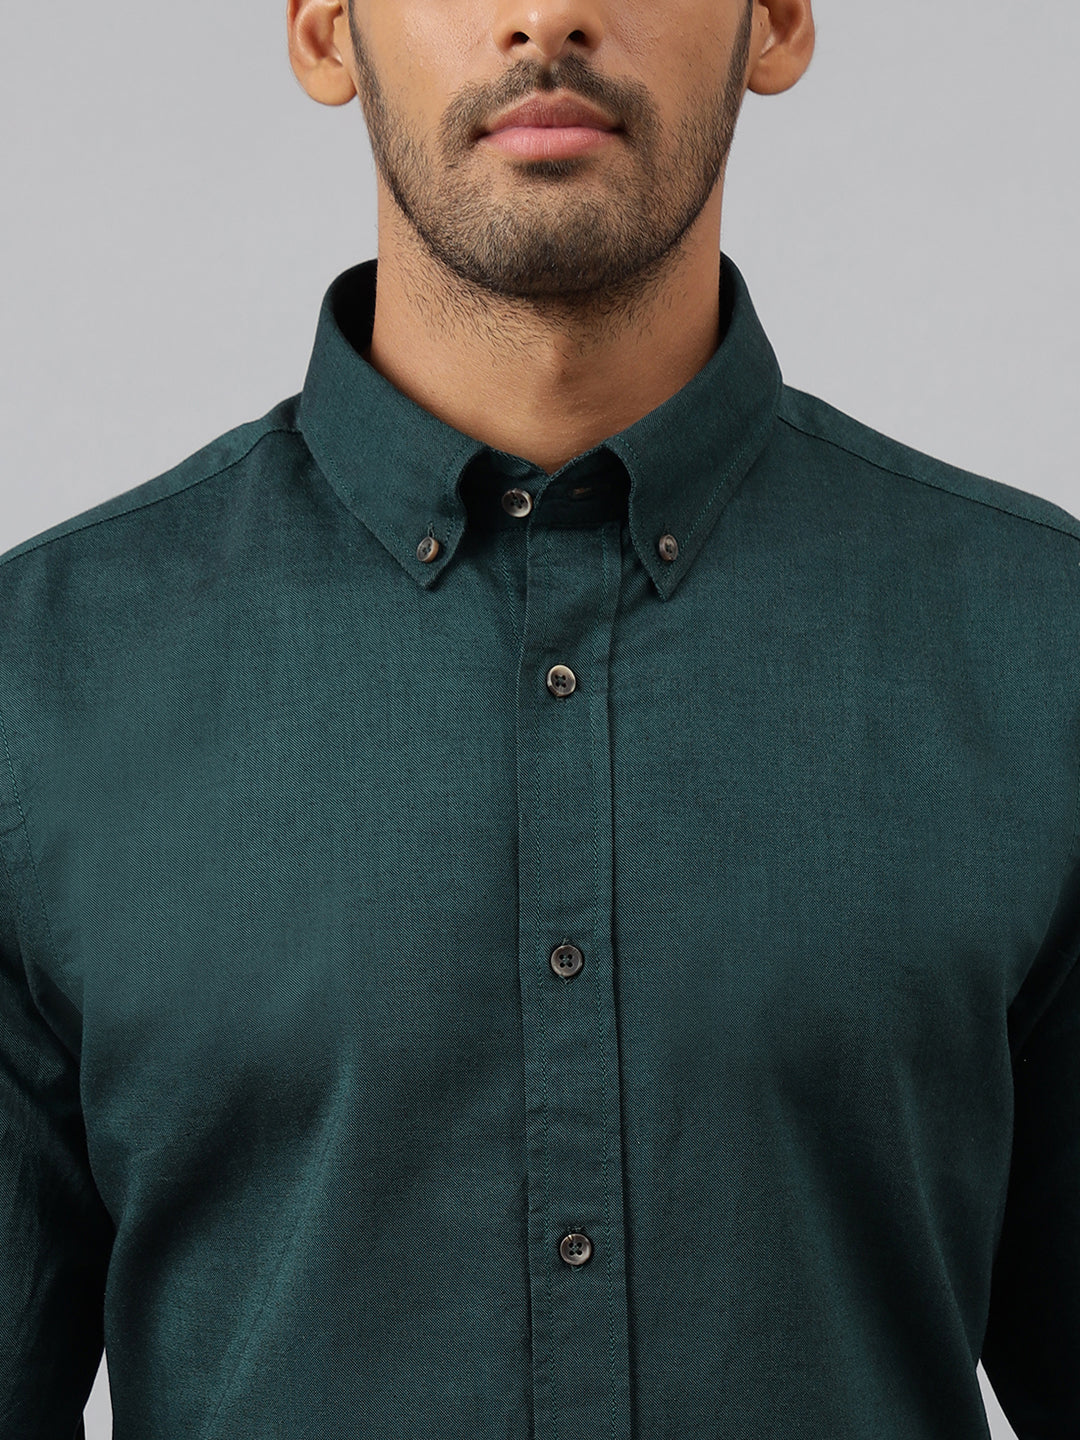 Man In Forest Shirt